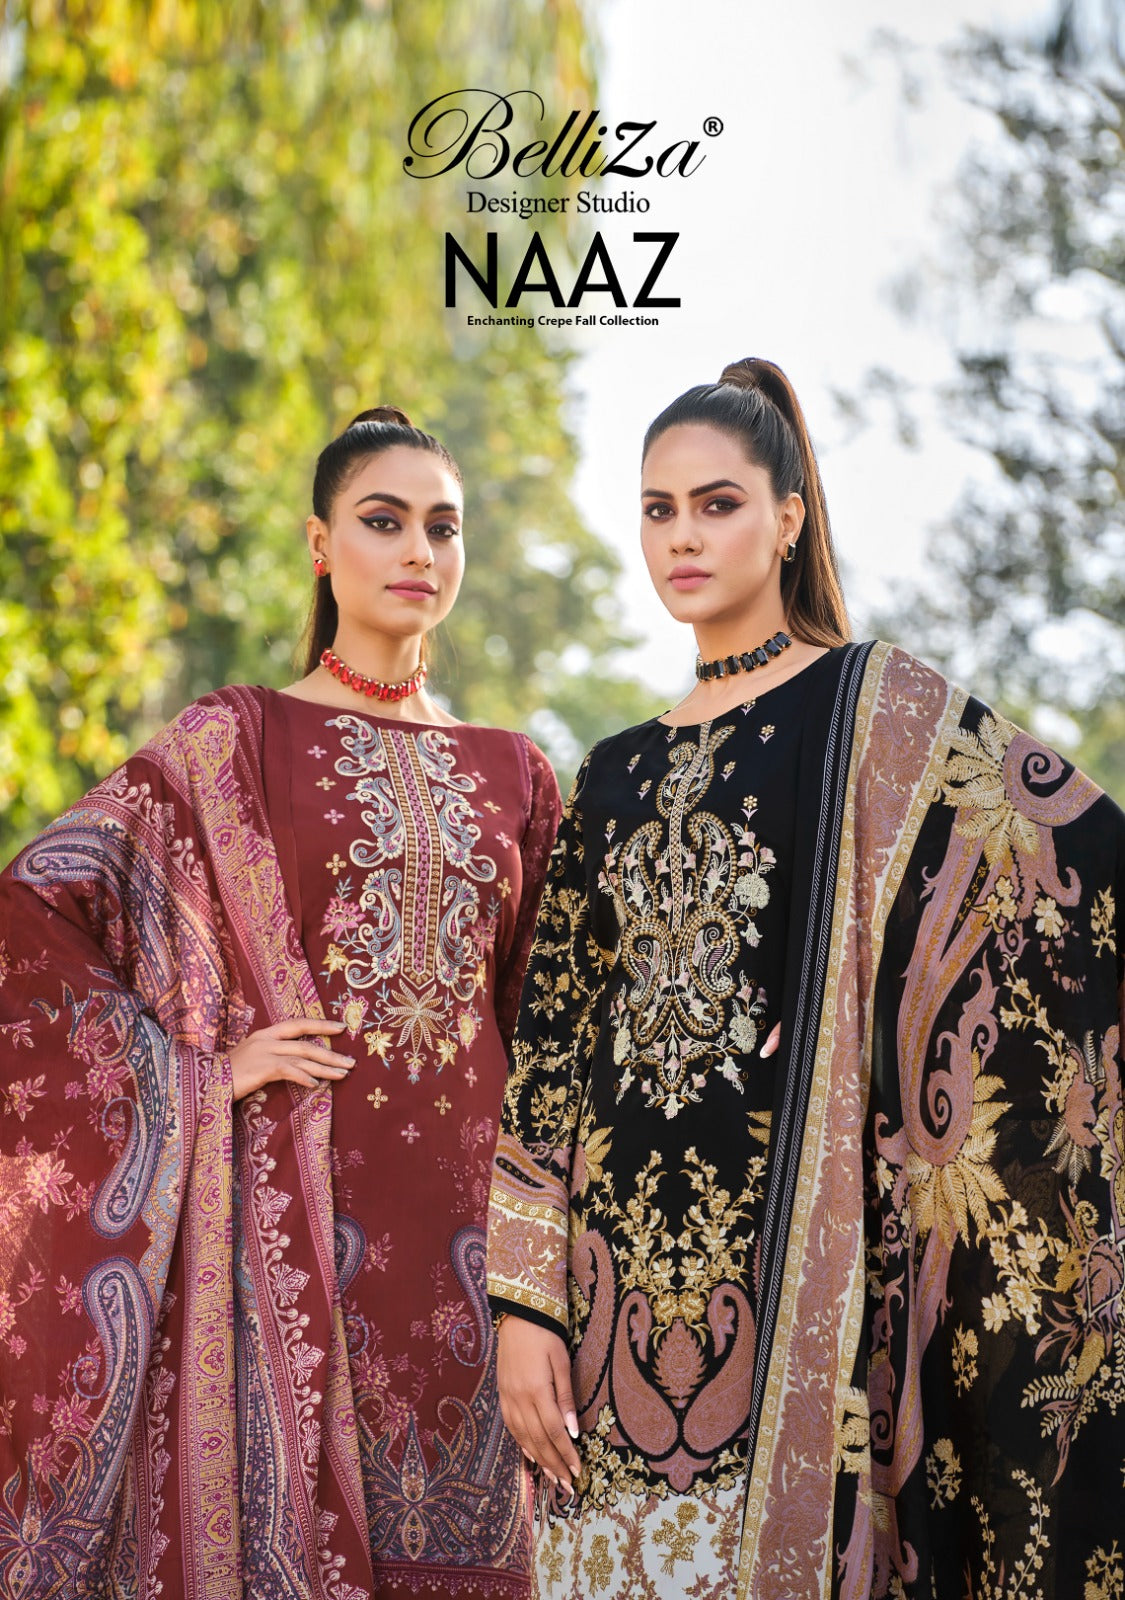 Belliza Designer Suits Naaz Crepe With Embroidery Work Crepe Suits Wholesale Supplier in Surat - jilaniwholesalesuit